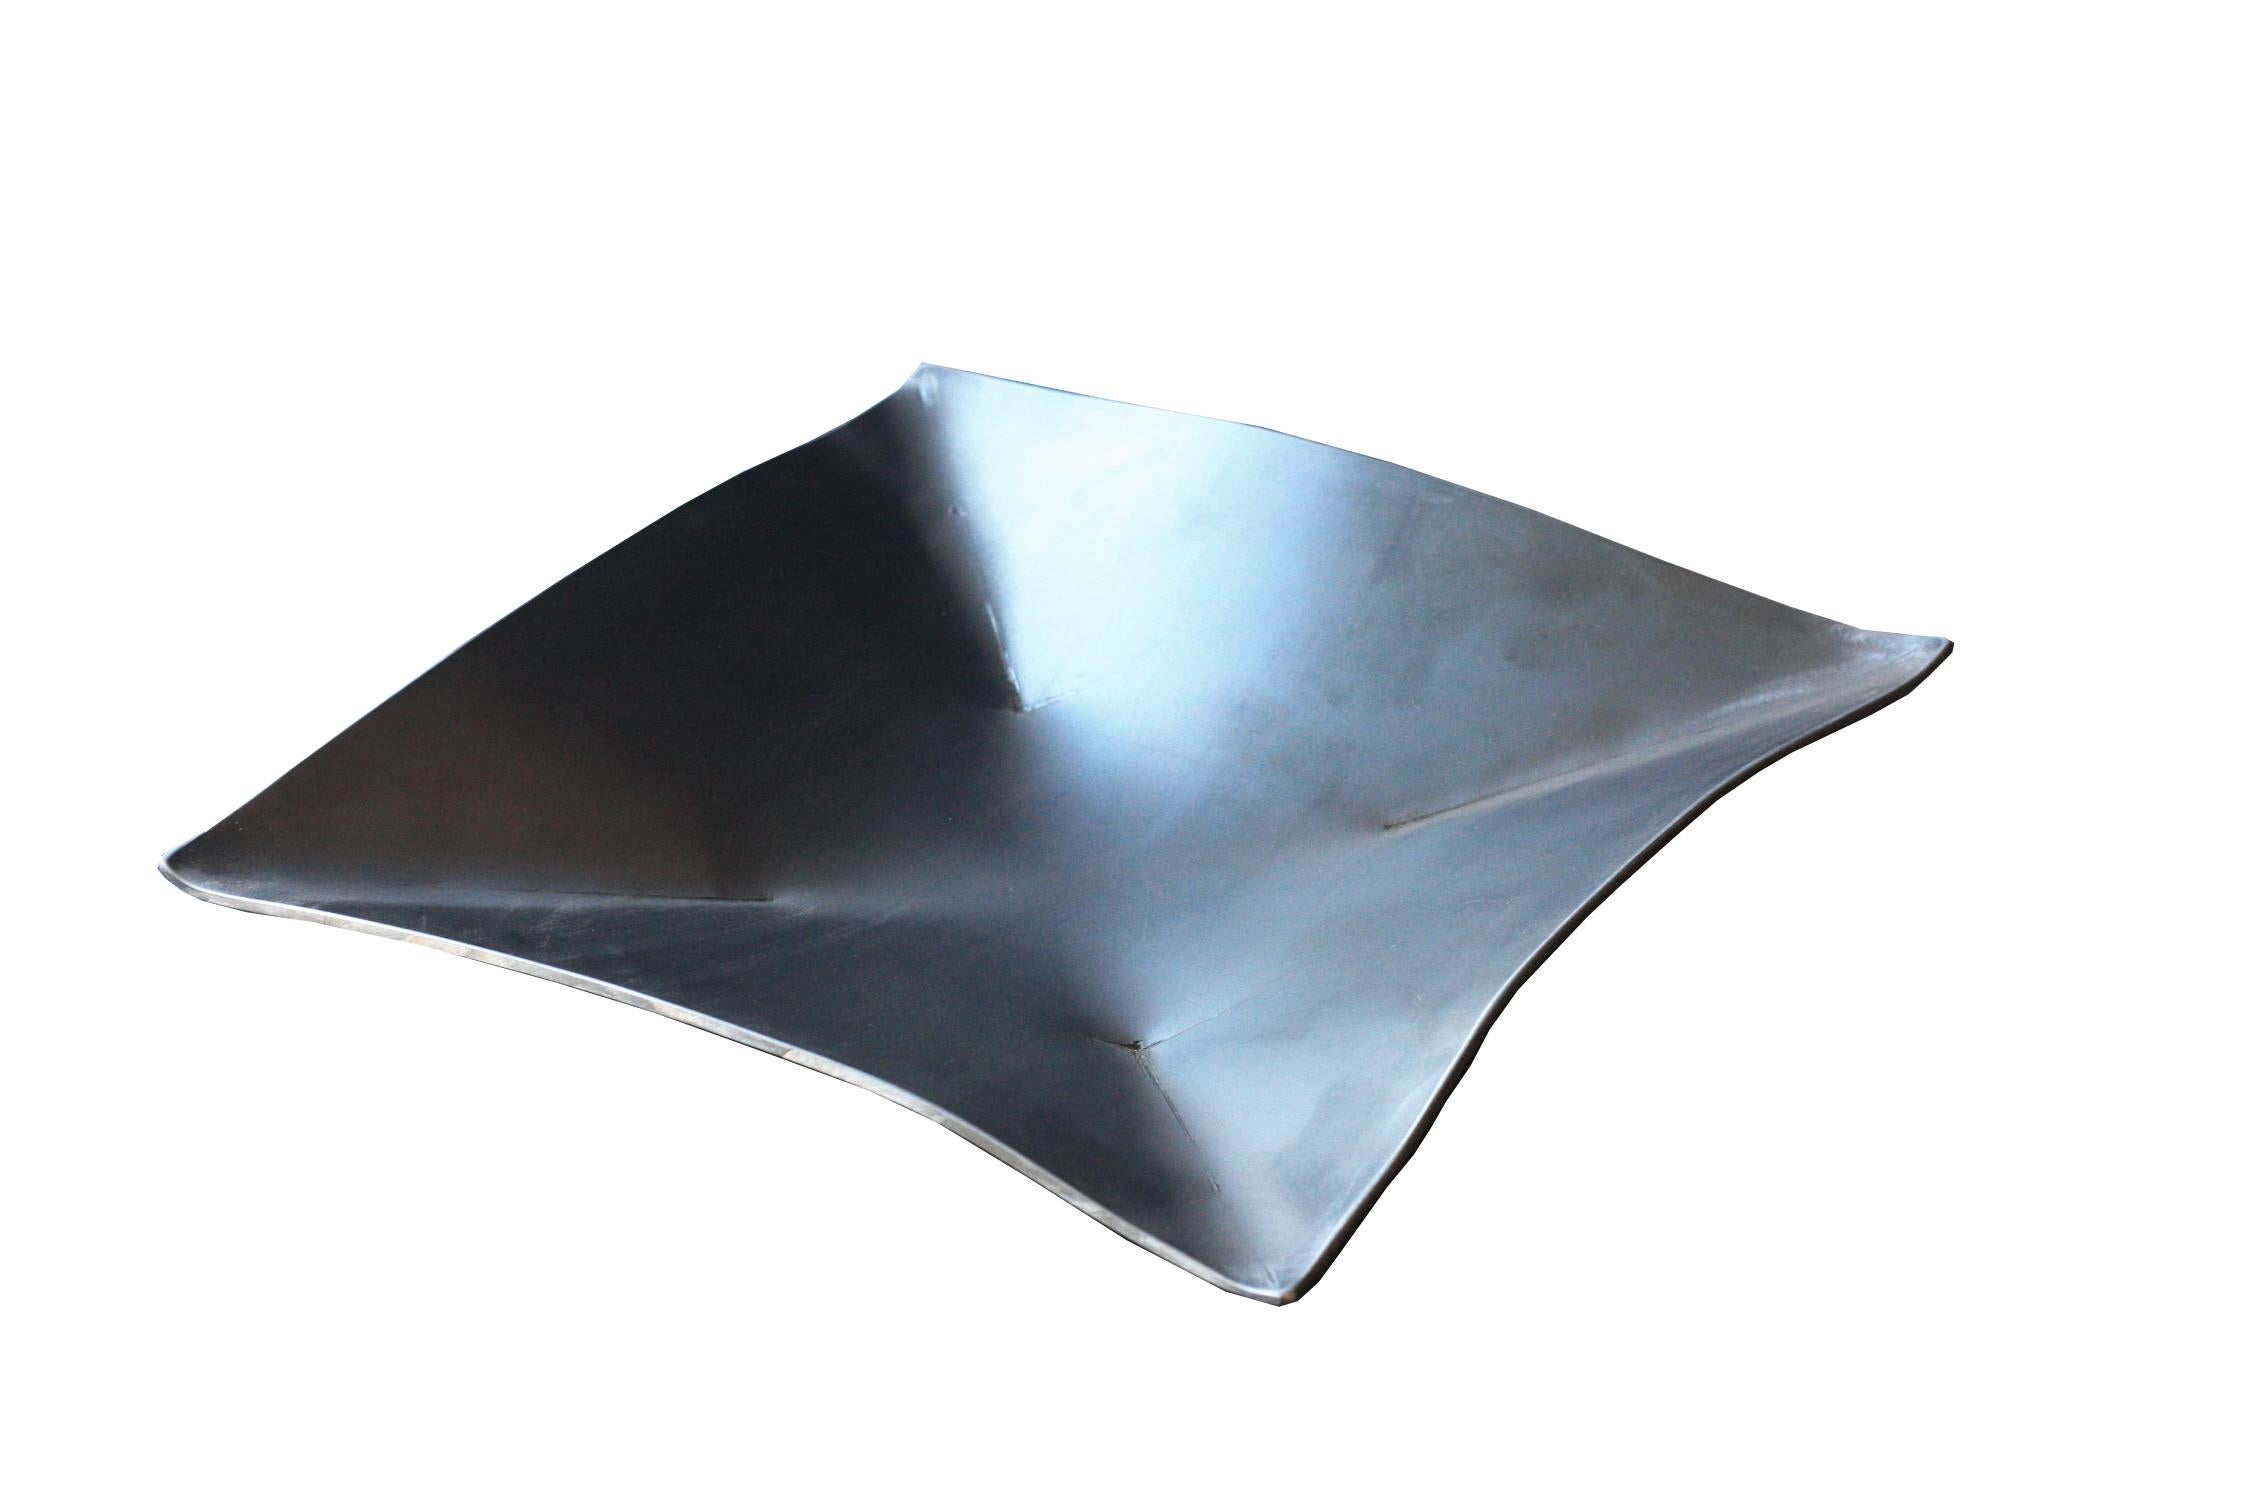 Canadian Metal Tray in Raw Waxed Aluminum, Origami Style, Contemporary Design by Mtharu For Sale